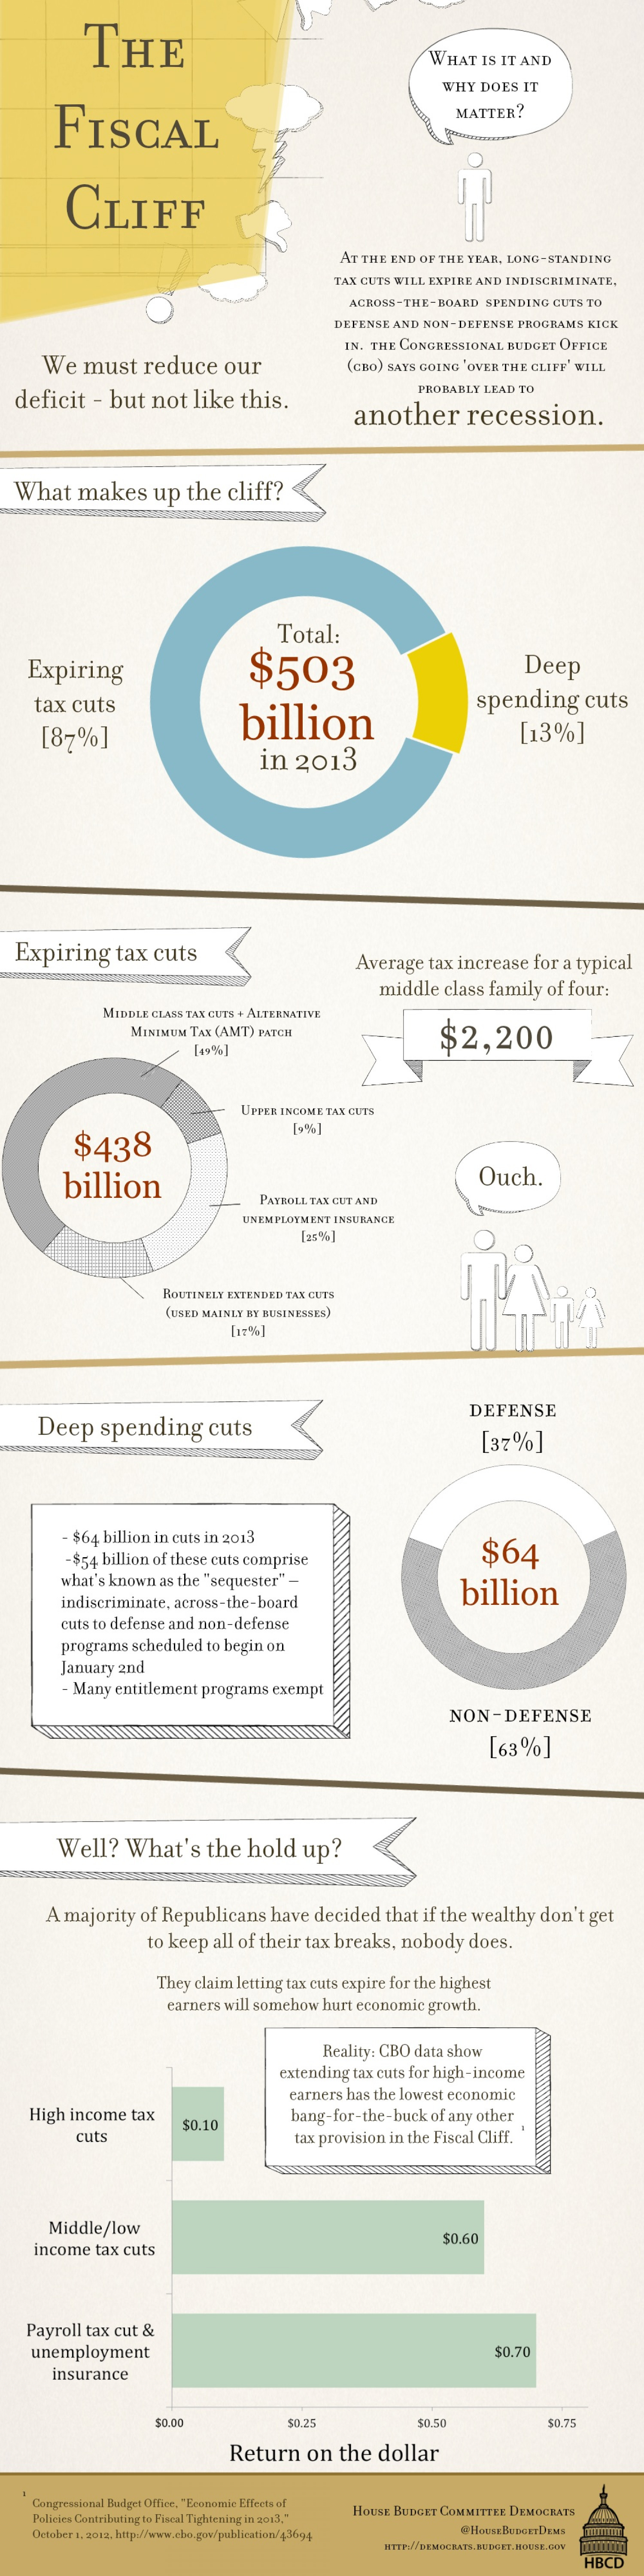 The Fiscal Cliff: What is it and why does it matter? Infographic